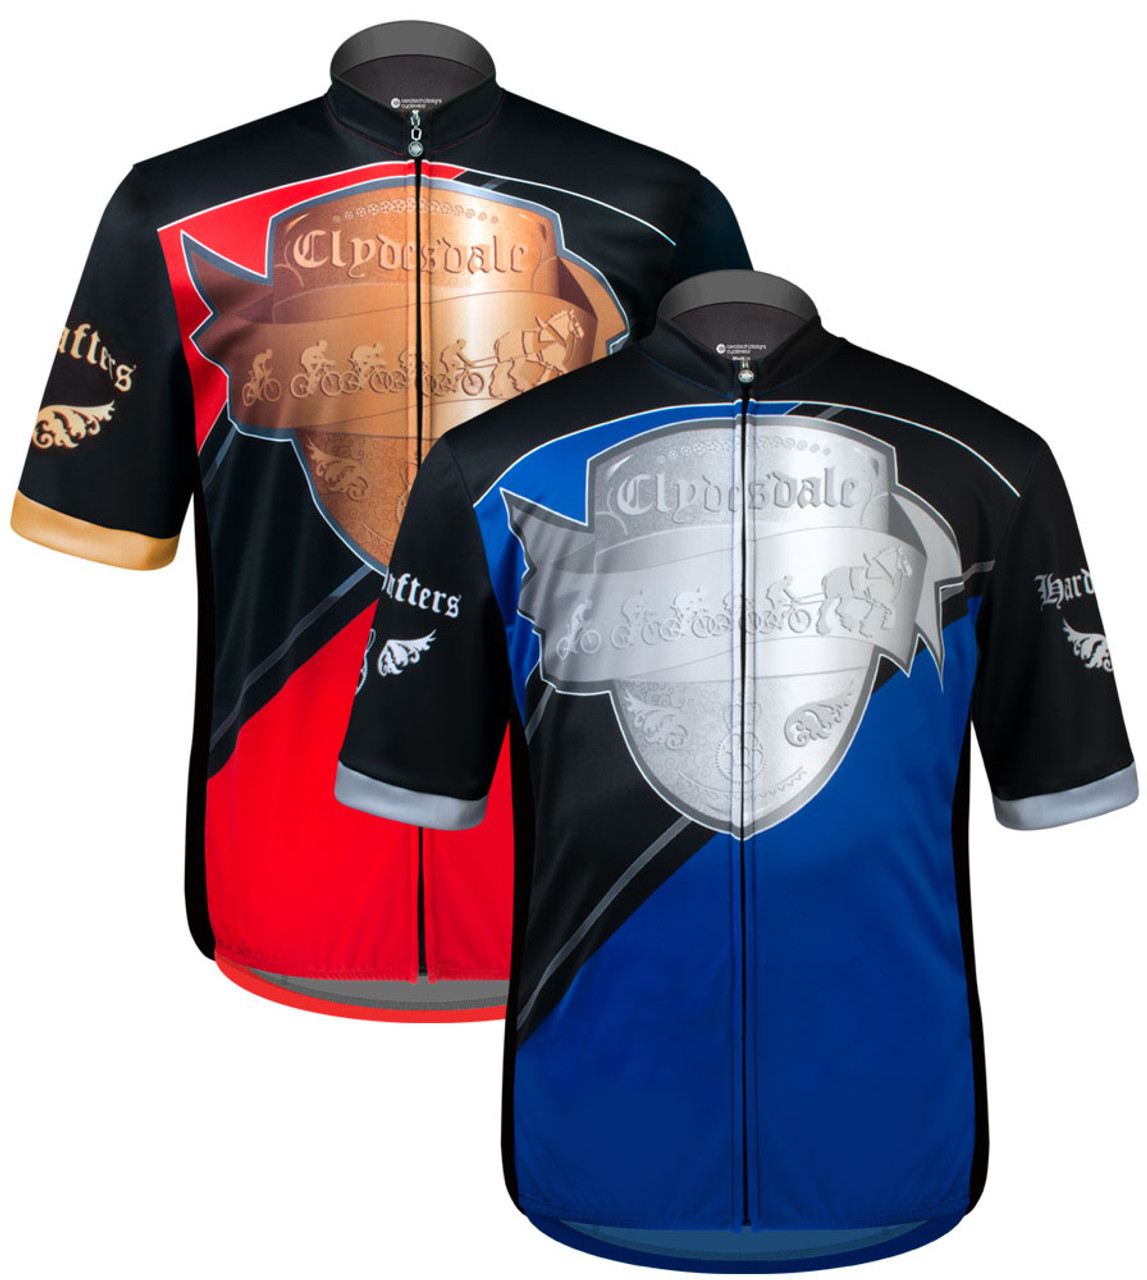 clydesdale cycling clothing